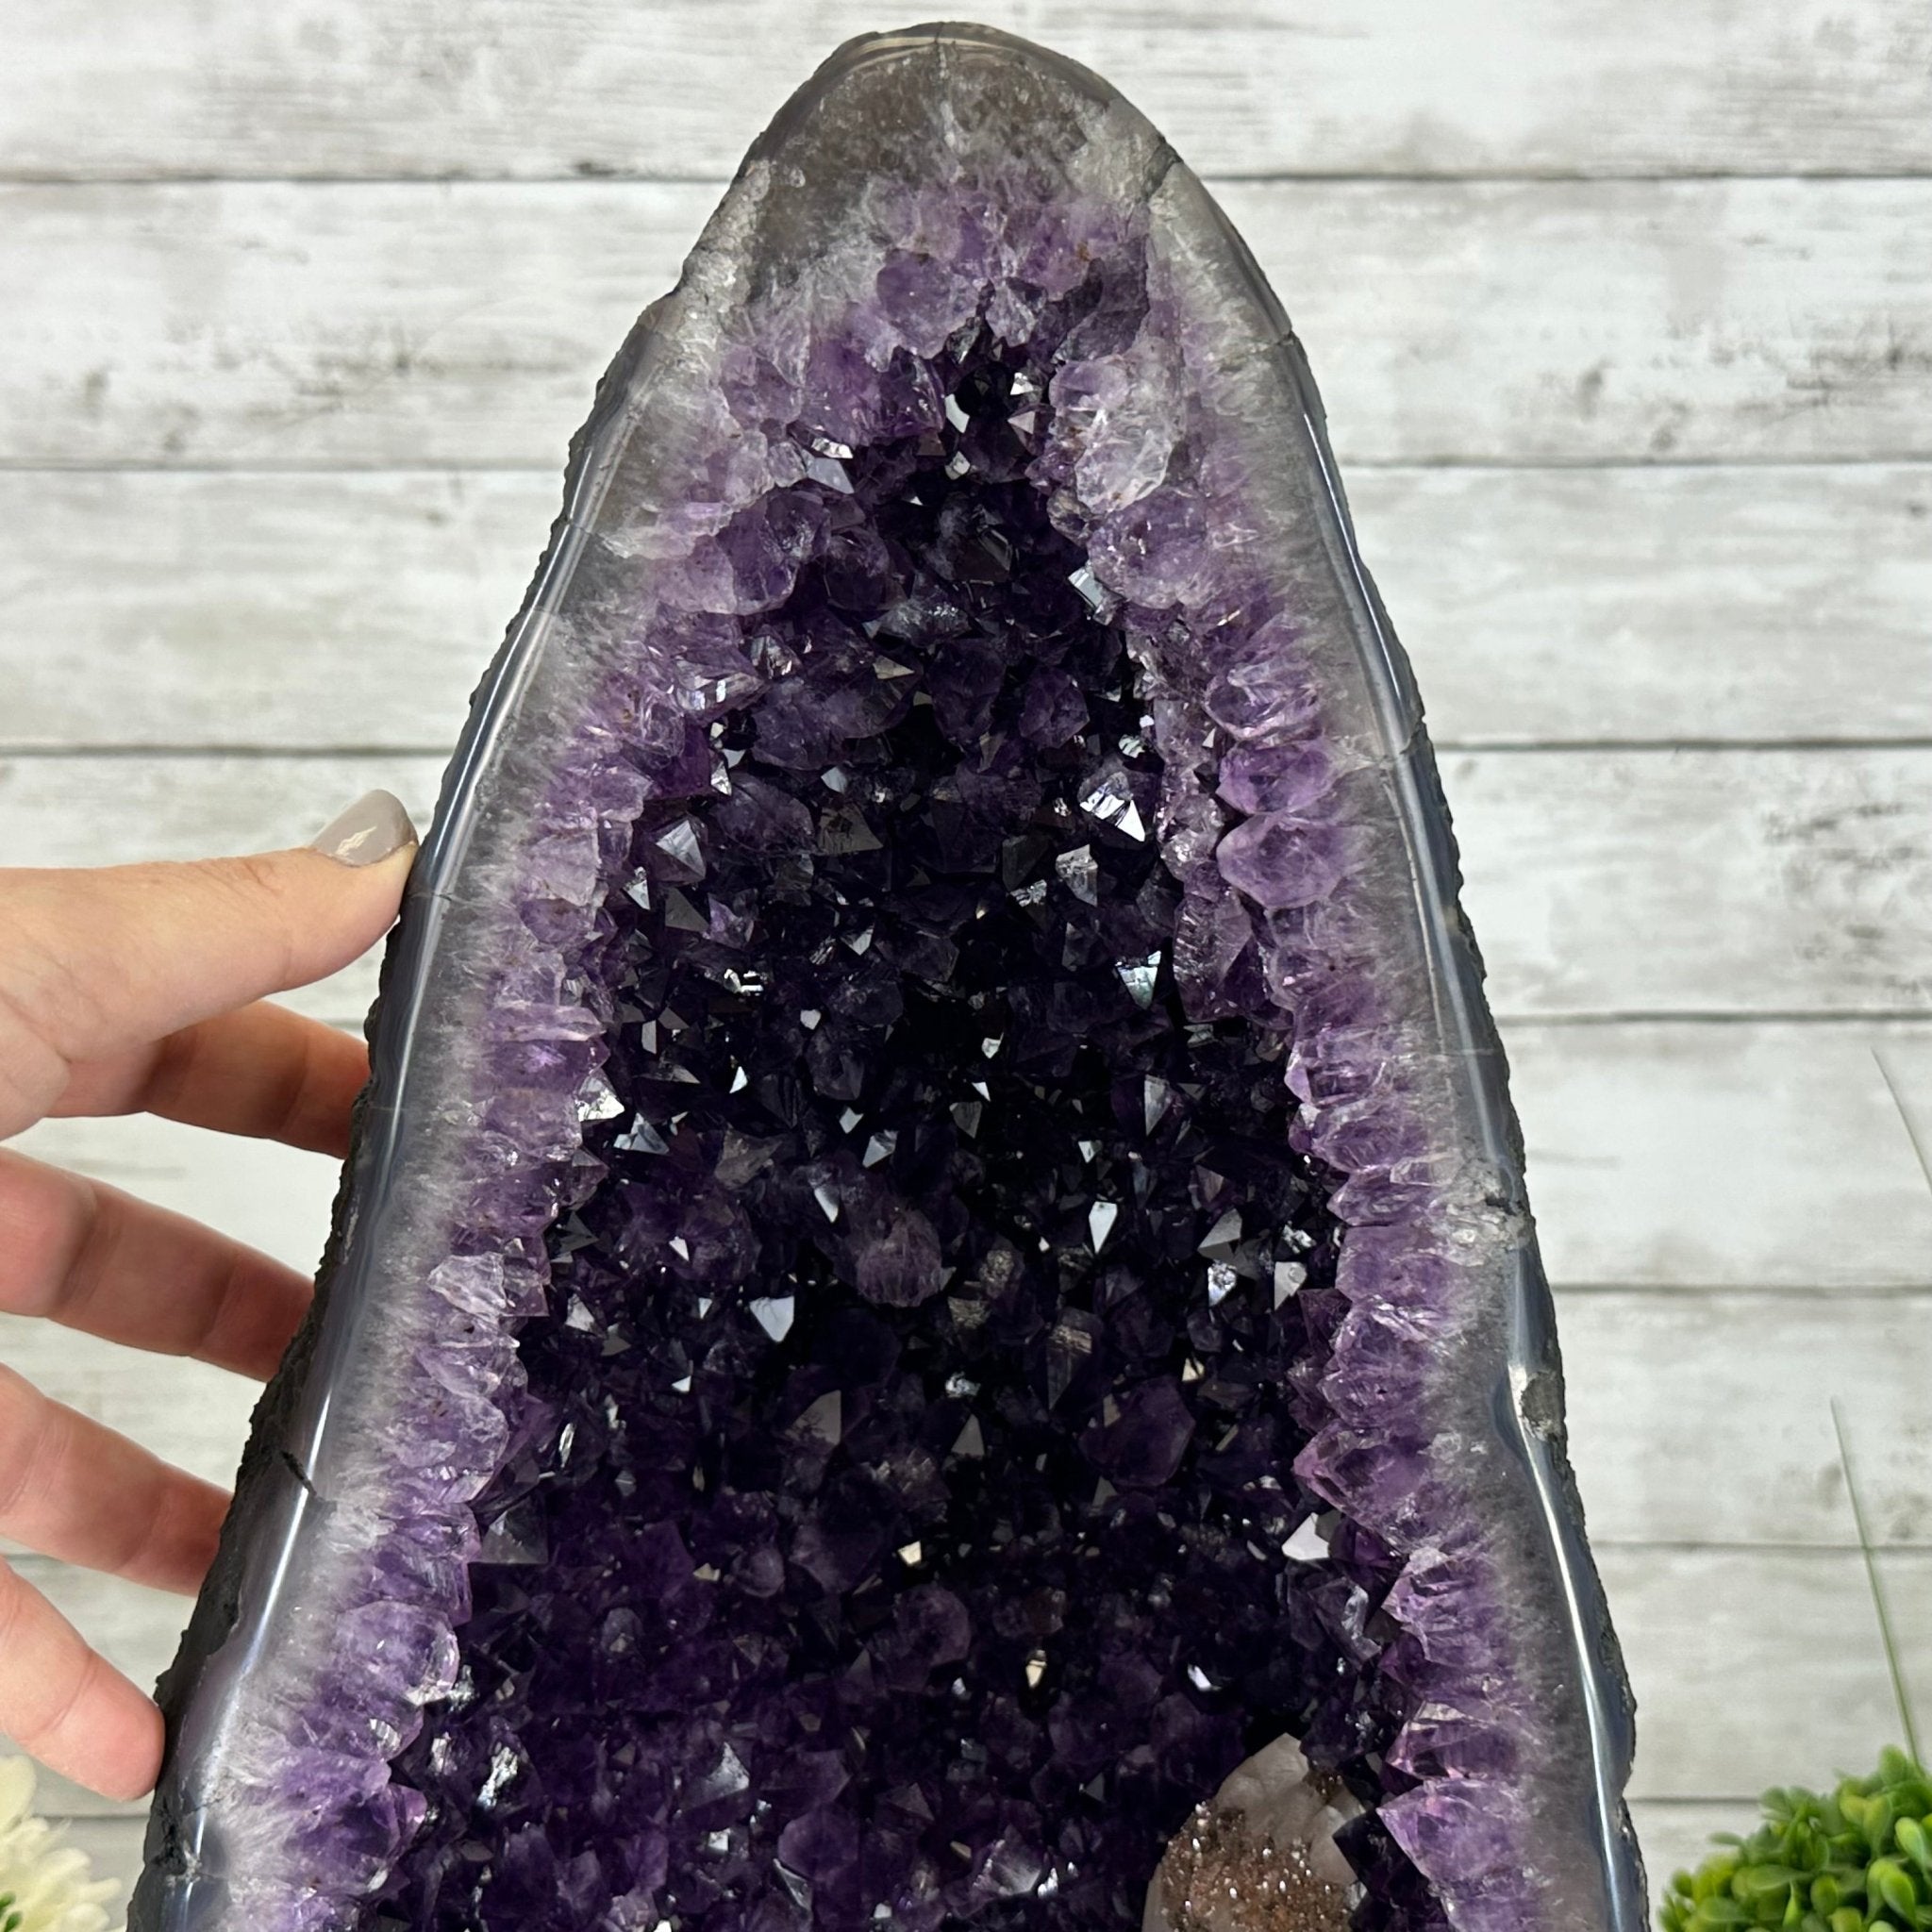 Super Quality Brazilian Amethyst Cathedral, 44 lbs & 18.6" Tall #5601-1311 - Brazil GemsBrazil GemsSuper Quality Brazilian Amethyst Cathedral, 44 lbs & 18.6" Tall #5601-1311Cathedrals5601-1311